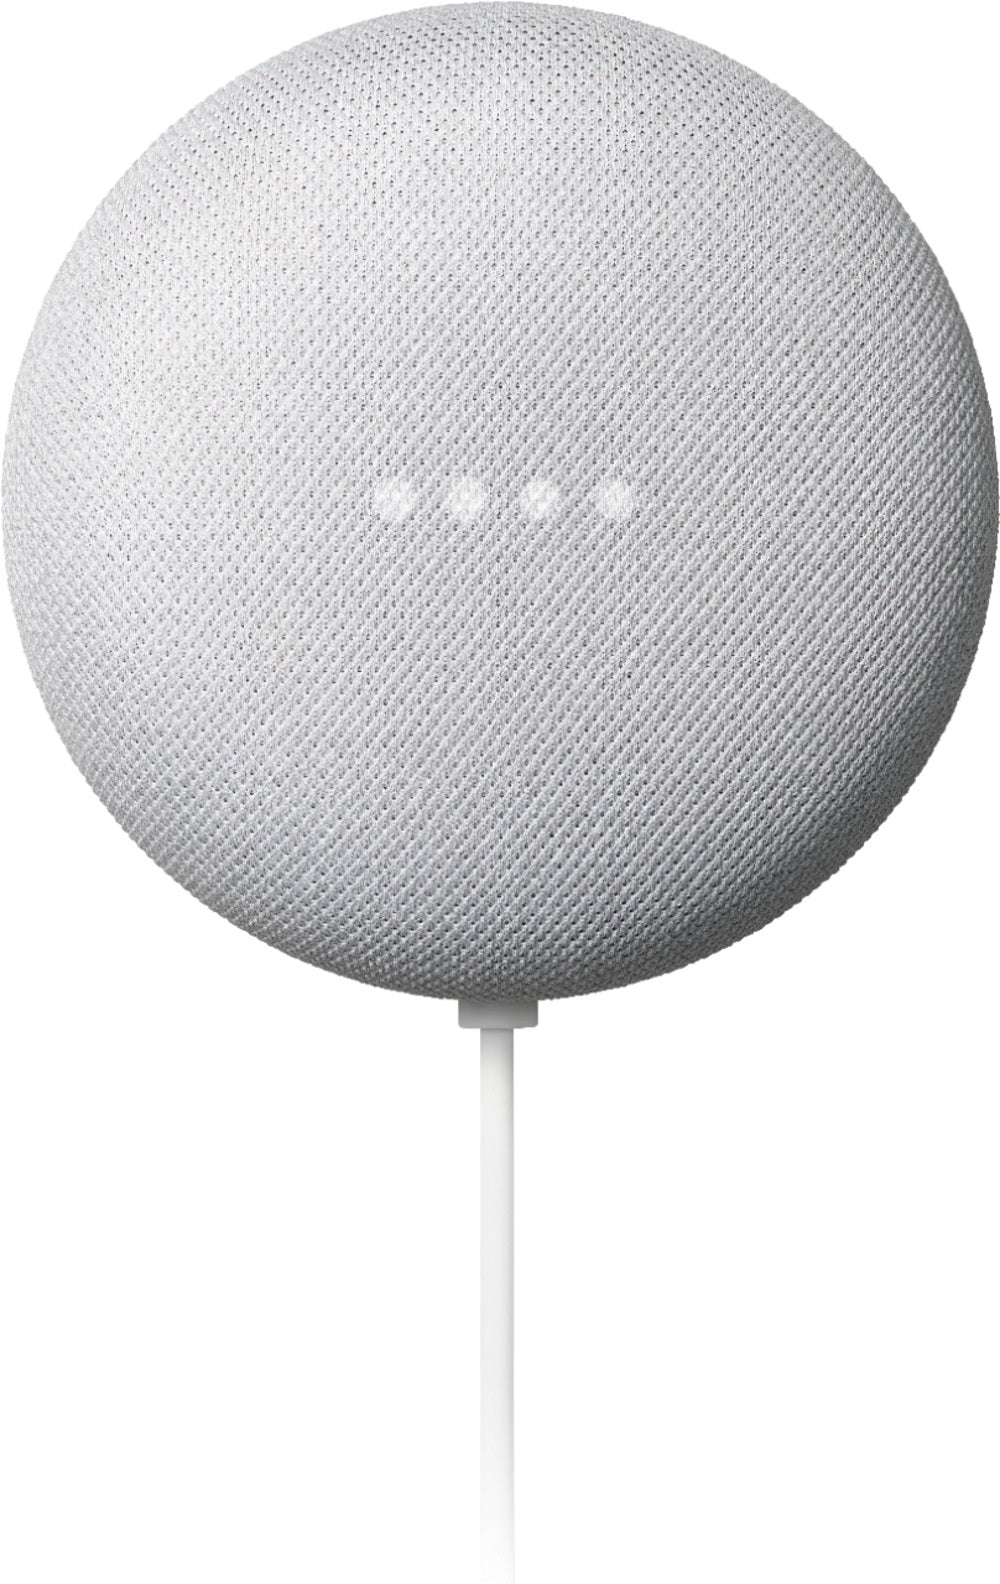 Google Nest Mini 2nd Generation Smart Speaker with Google Assistant - Chalk (Pre-Owned)